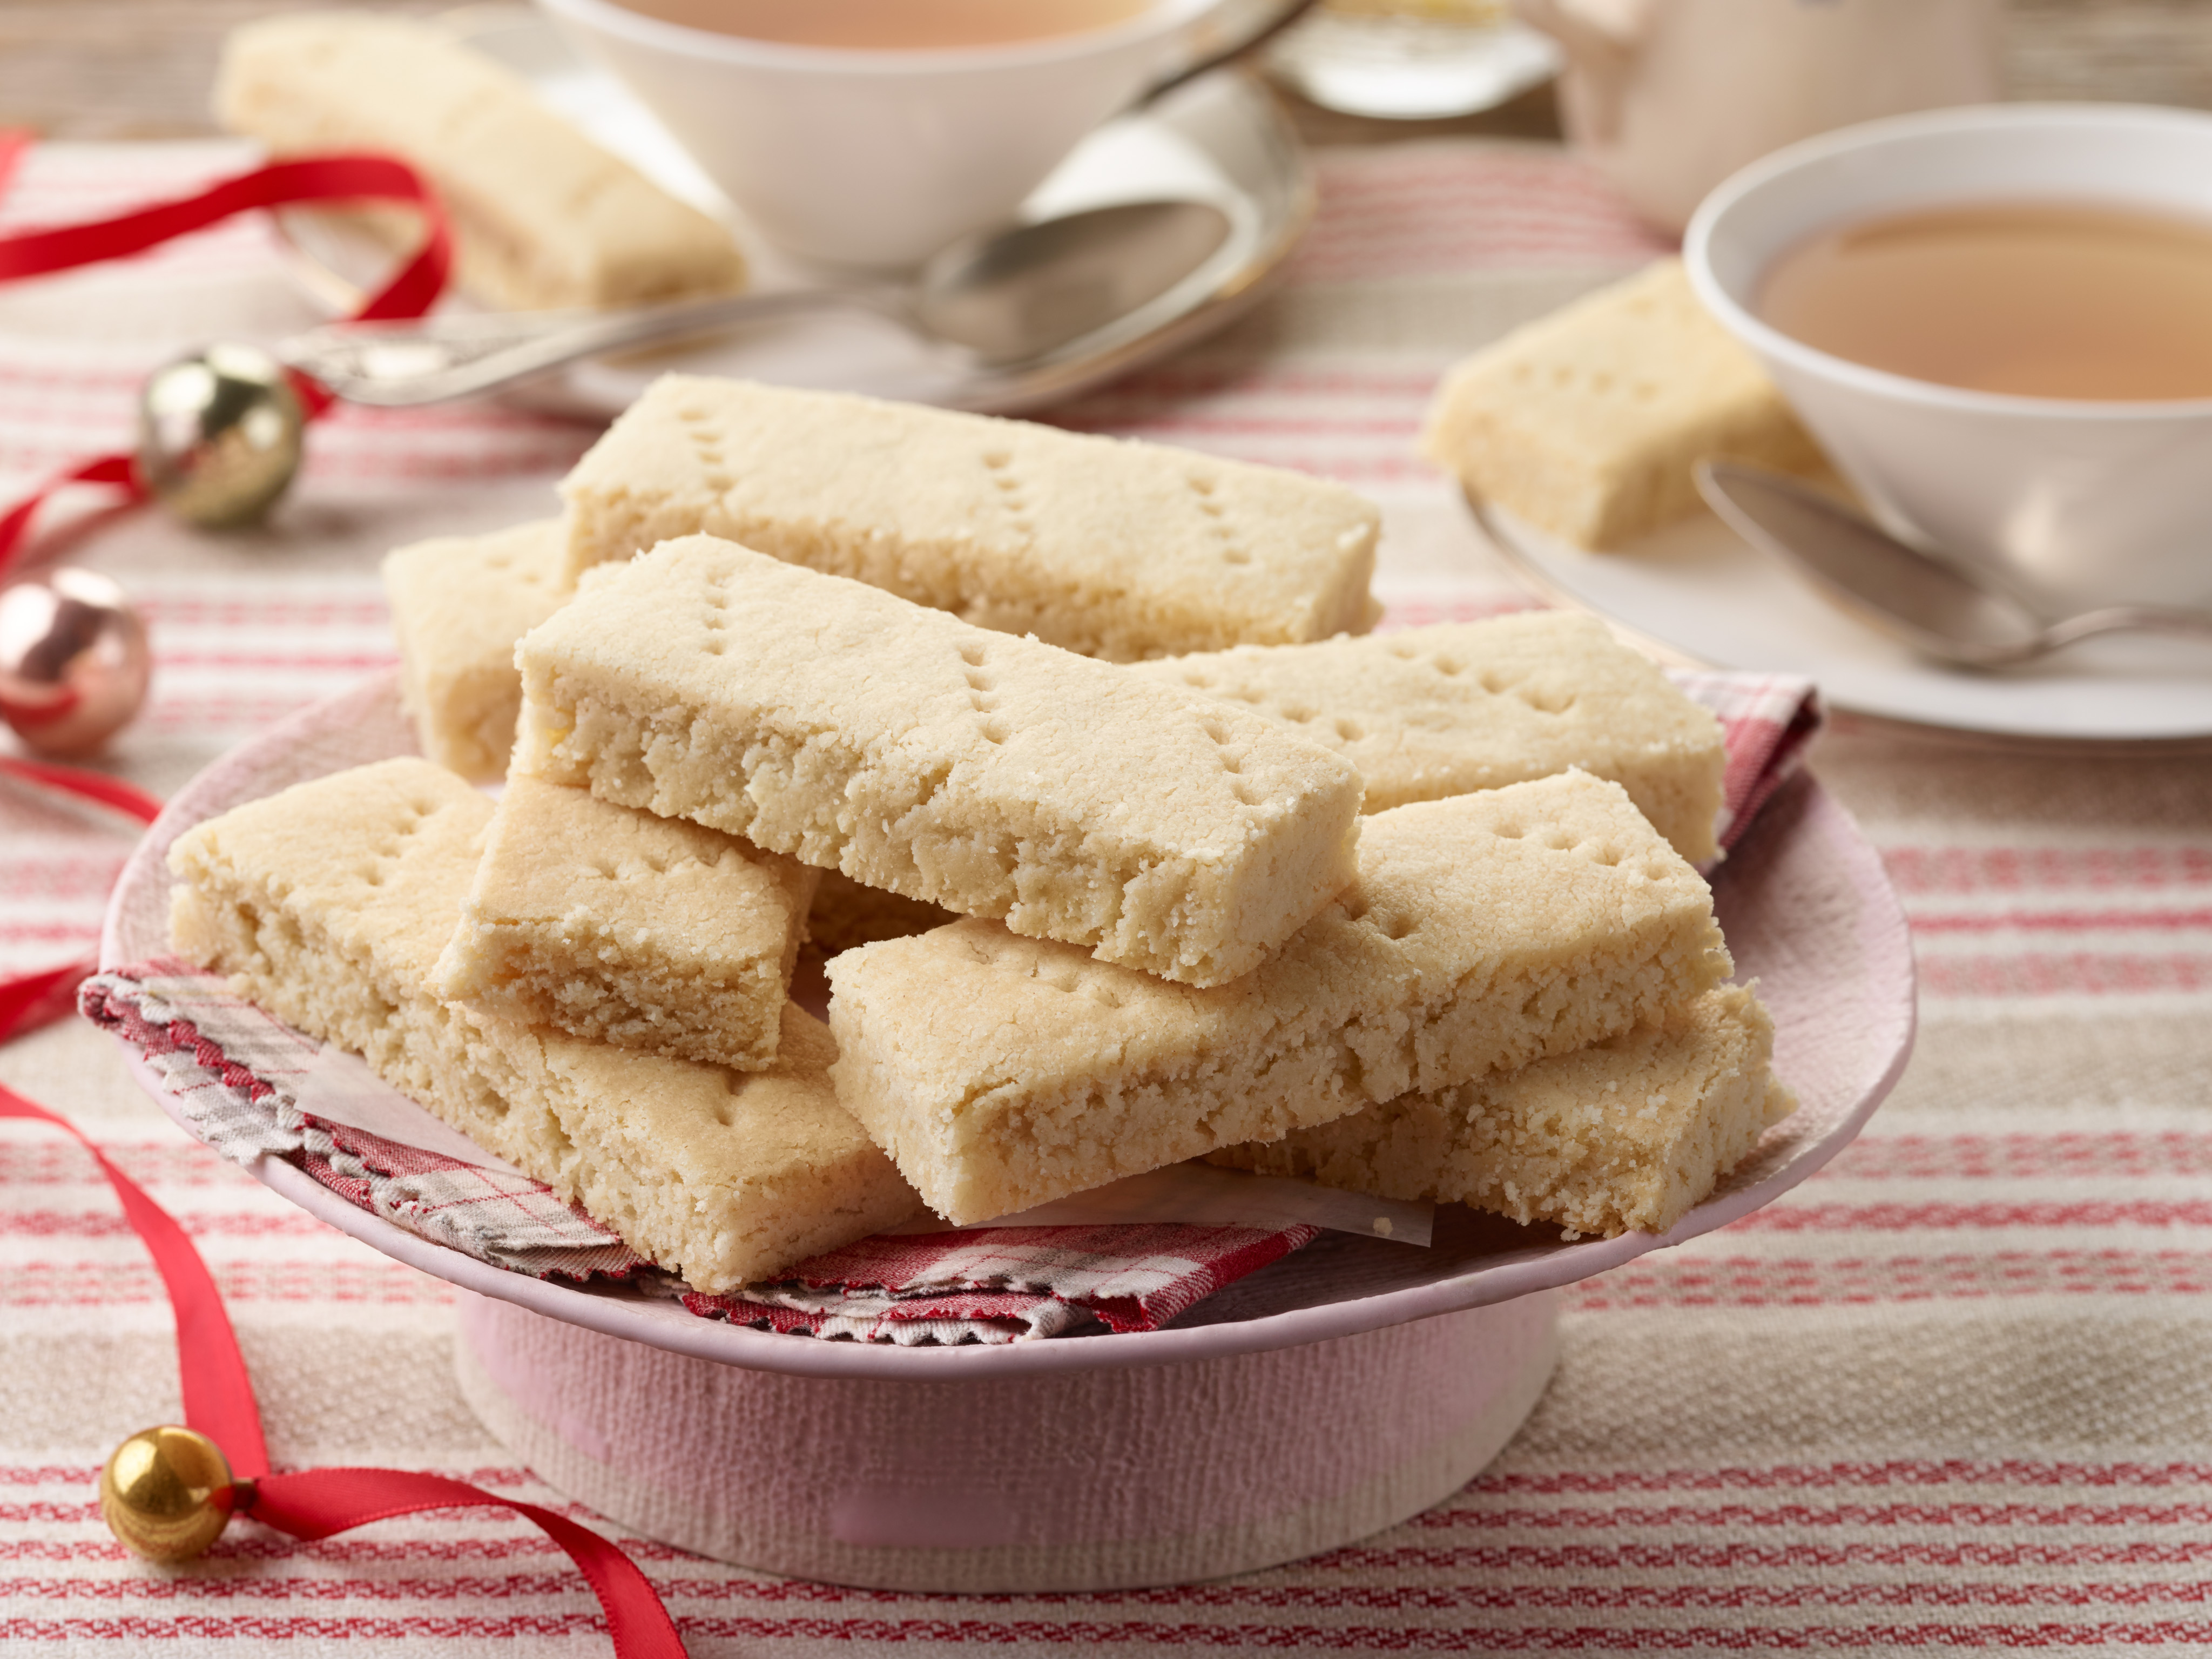 Savoring Time in the Kitchen: Classic Shortbread Cookies